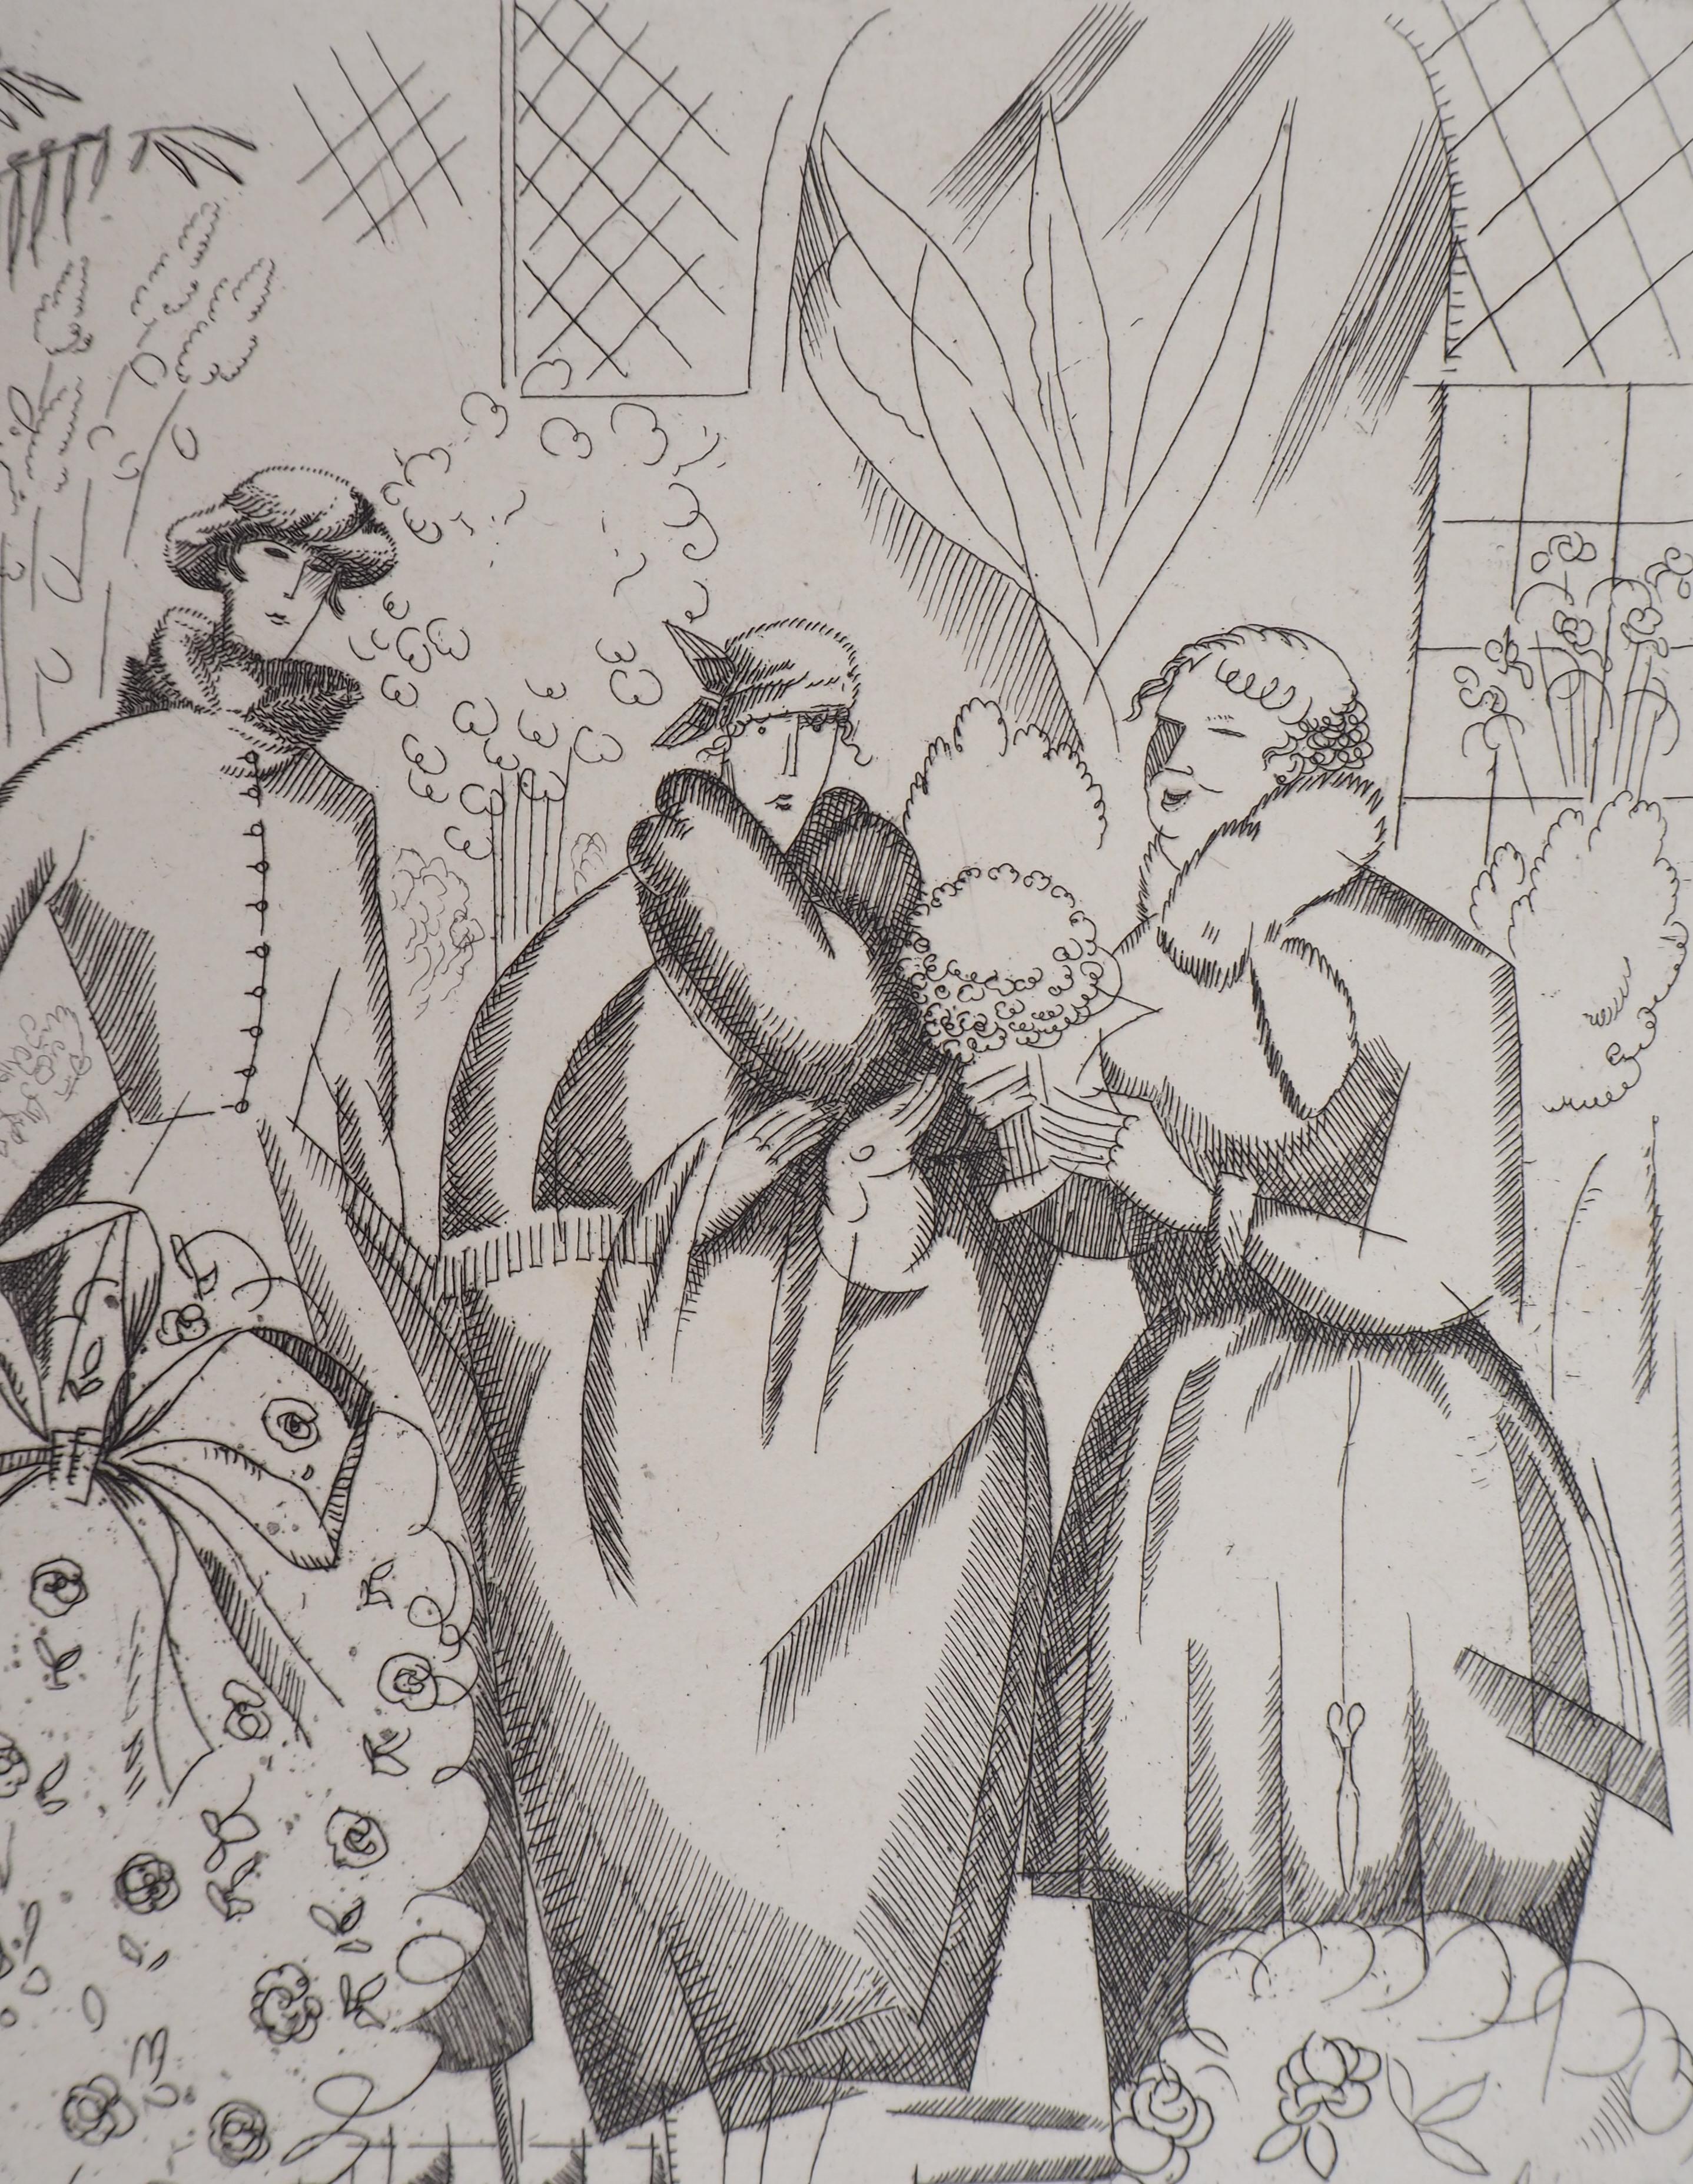 Jean Émile LABOUREUR
At the Florist, c. 1920

Original etching
Handsigned in pencil by the artist
Monogram in the plate
On vellum 32.5 x 25 cm (12.8 x 9.9 inches)

Very good condition, light marks of manipulation in the margins

REFERENCE : 
Catalog